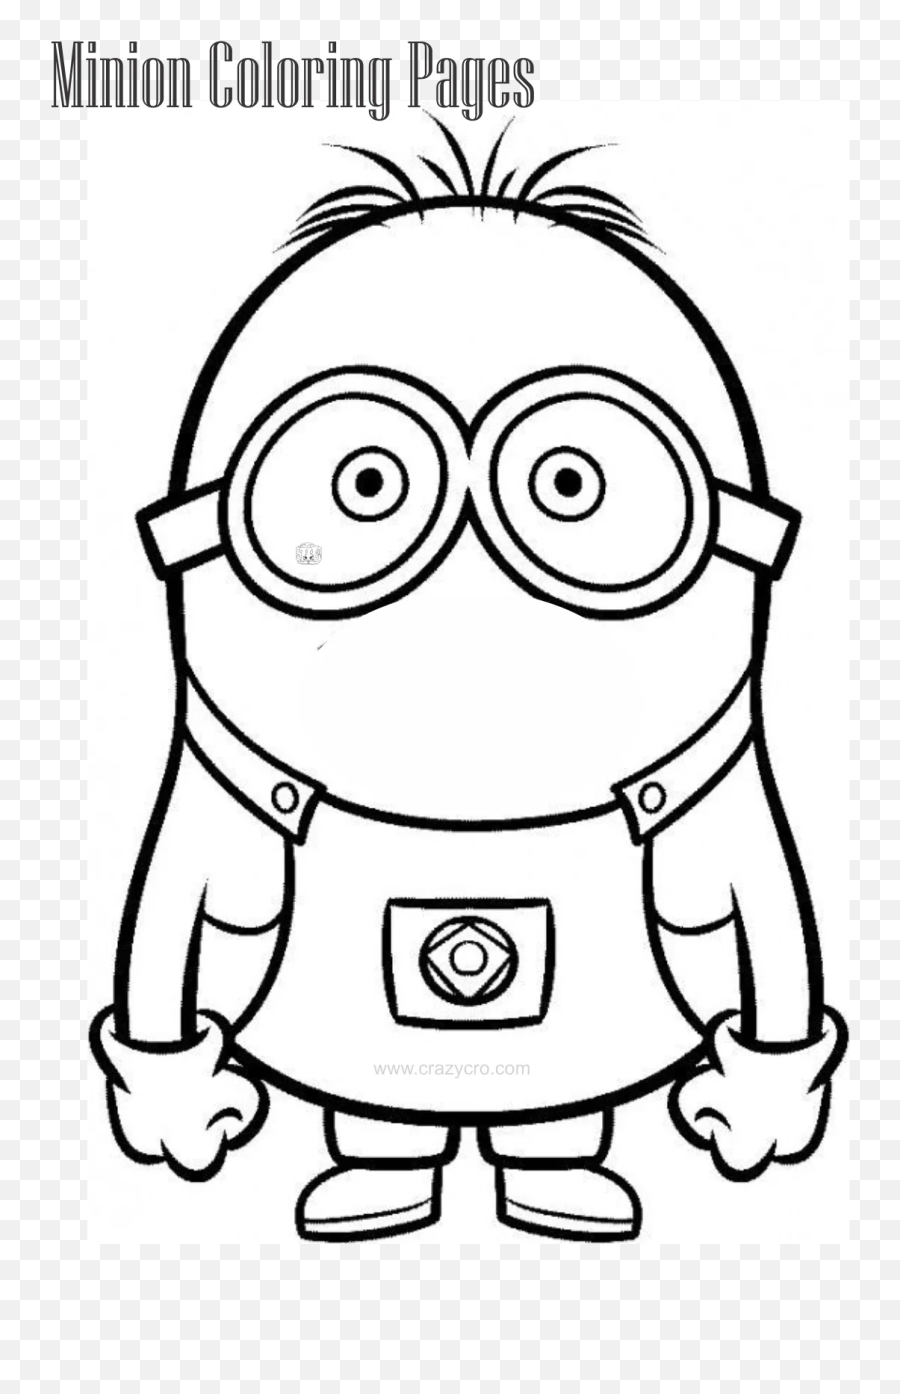 Minion Coloring Pages For Kids - Printable Emoji,Emoji Color Pages